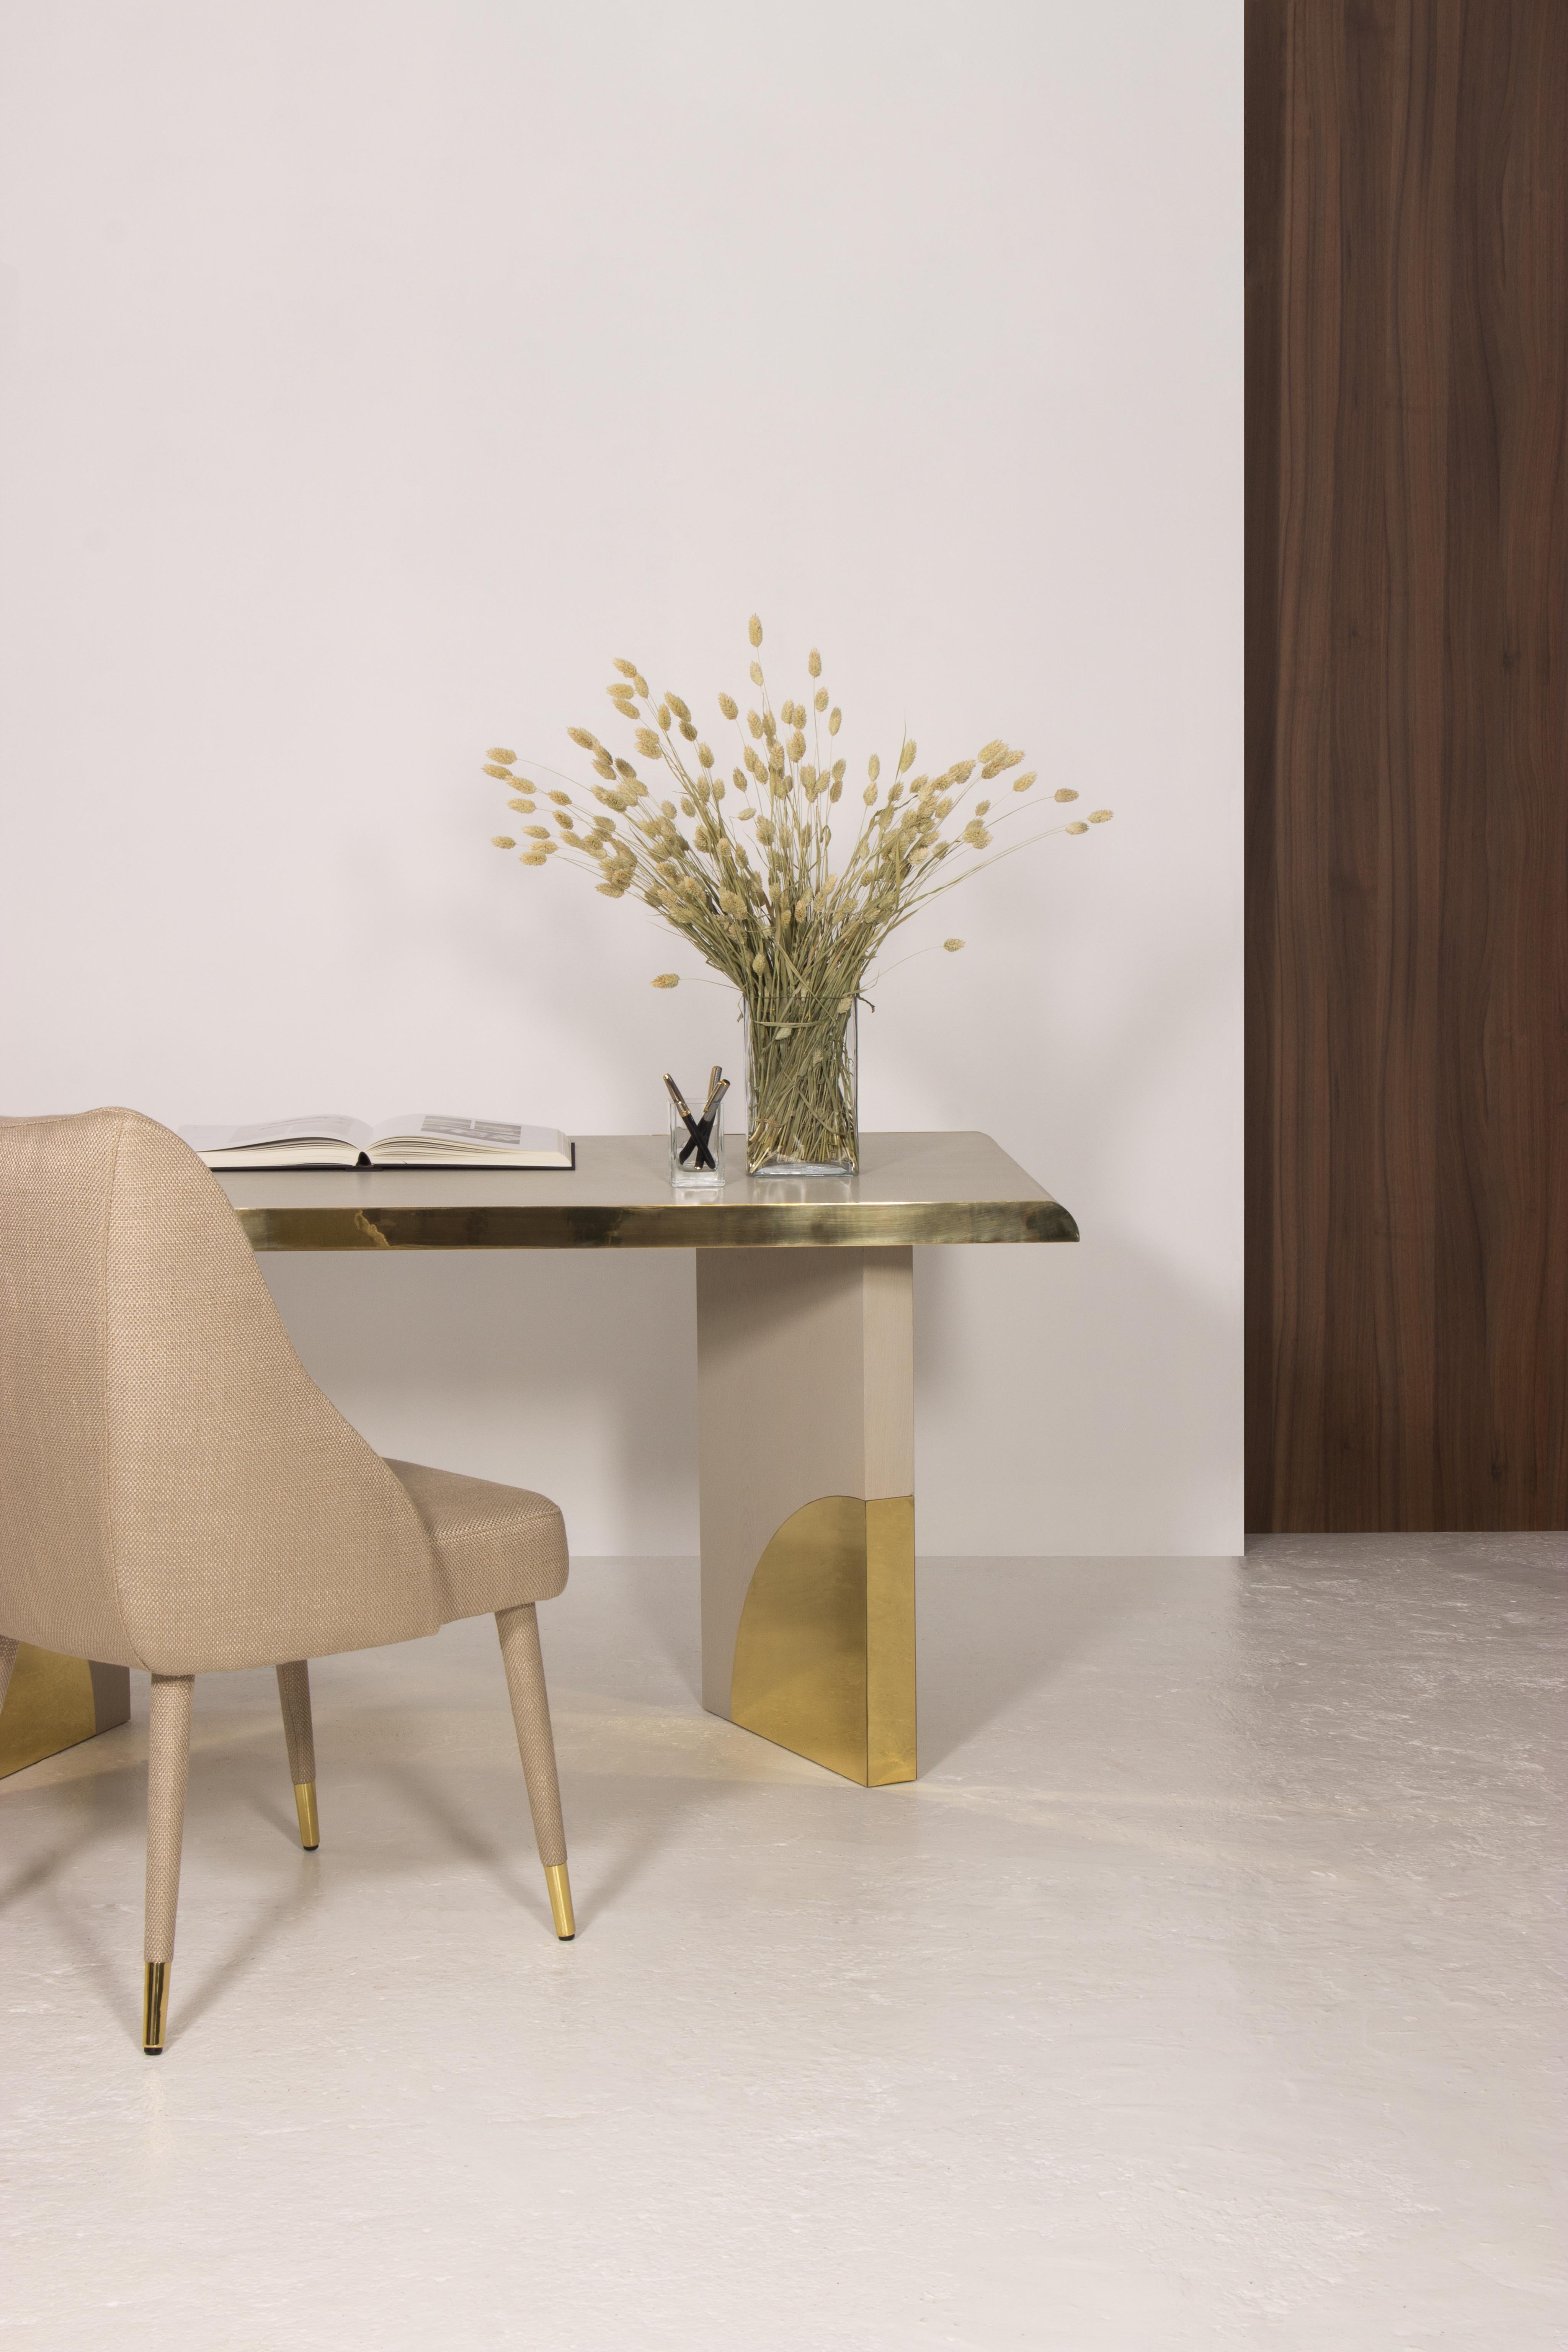 Utopia Desk, Cream Oak and Polished Brass, InsidherLand by Joana Santos Barbosa In New Condition For Sale In Maia, Porto